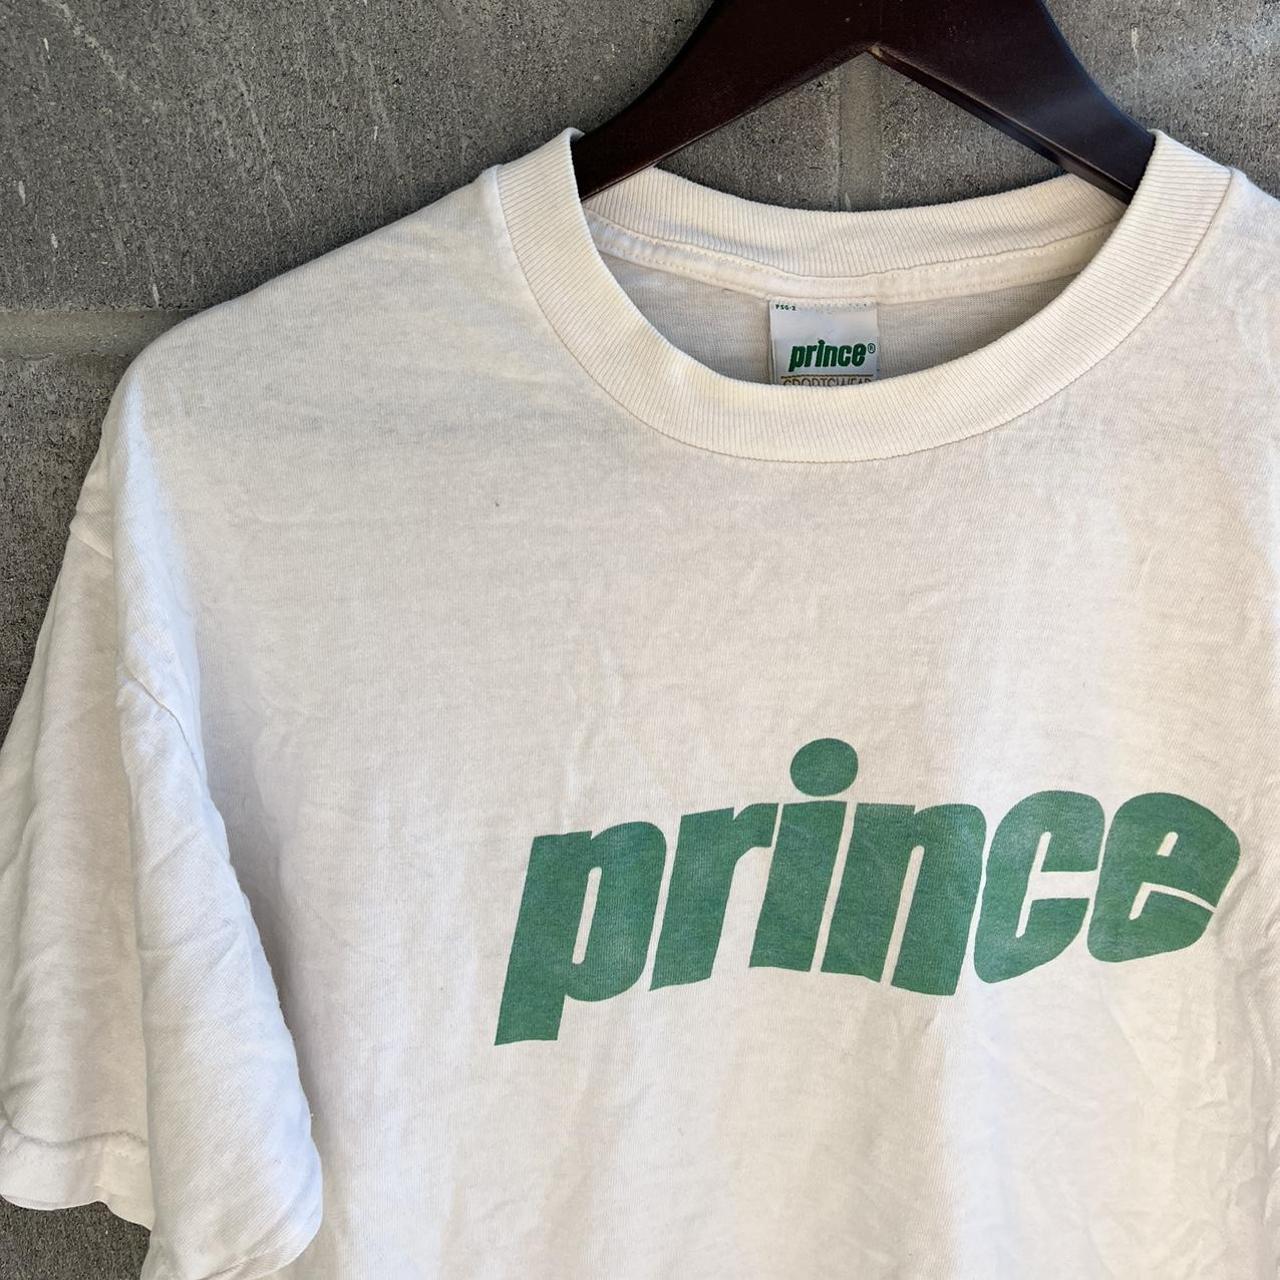 Product Image 2 - prince sportswear tshirt 

-great condition